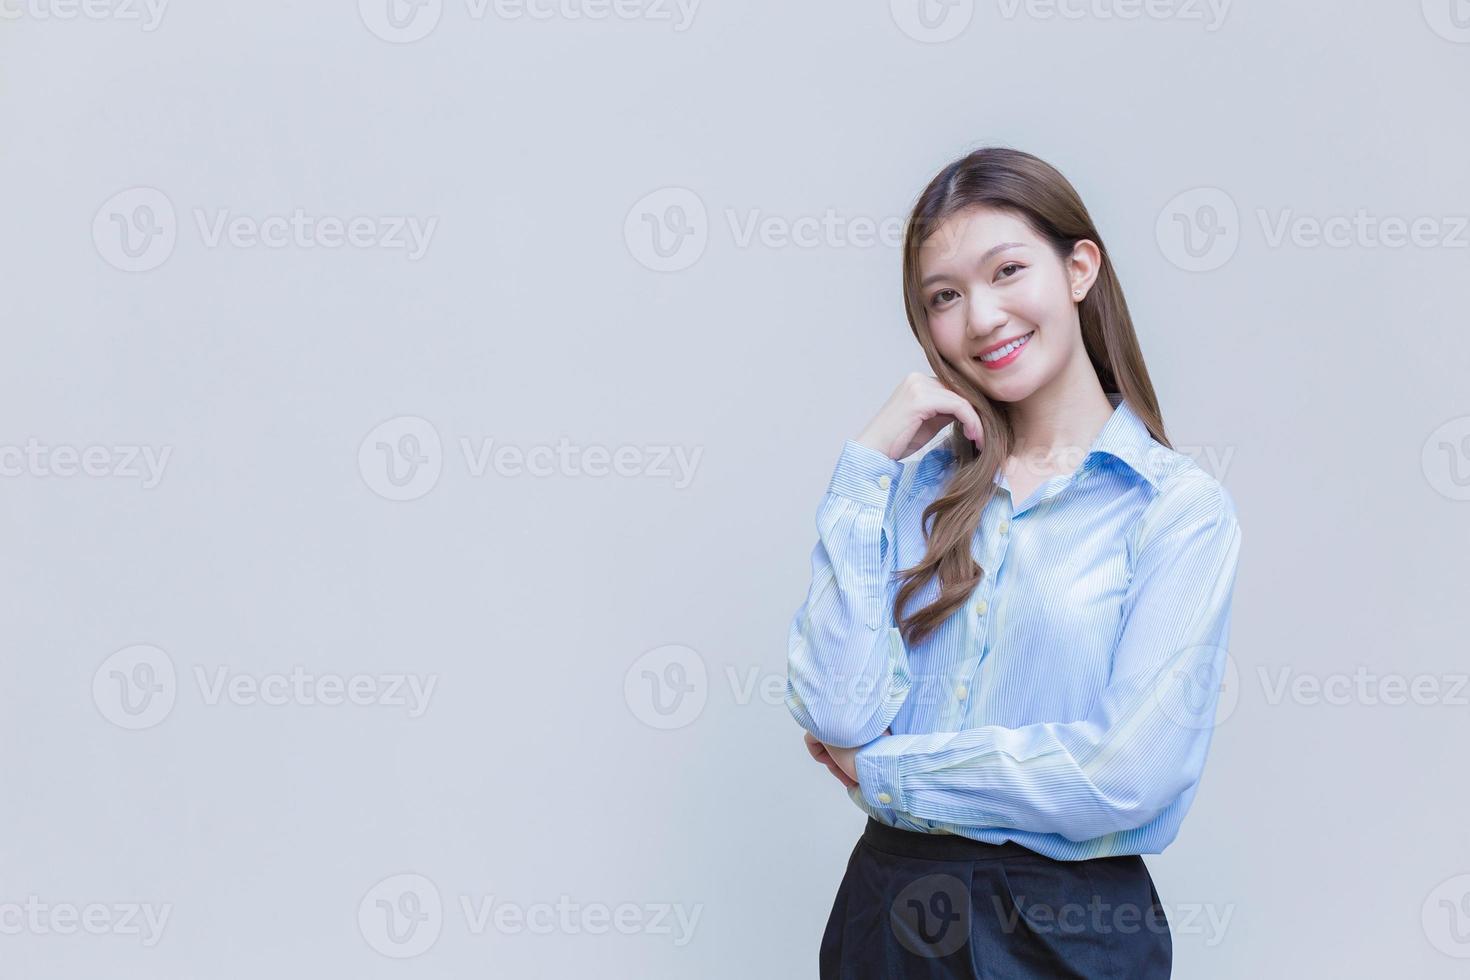 Young Asian business working woman with long hair who wear a blue long sleeve shirt smiles happily while she cross arms to present something on white background. photo